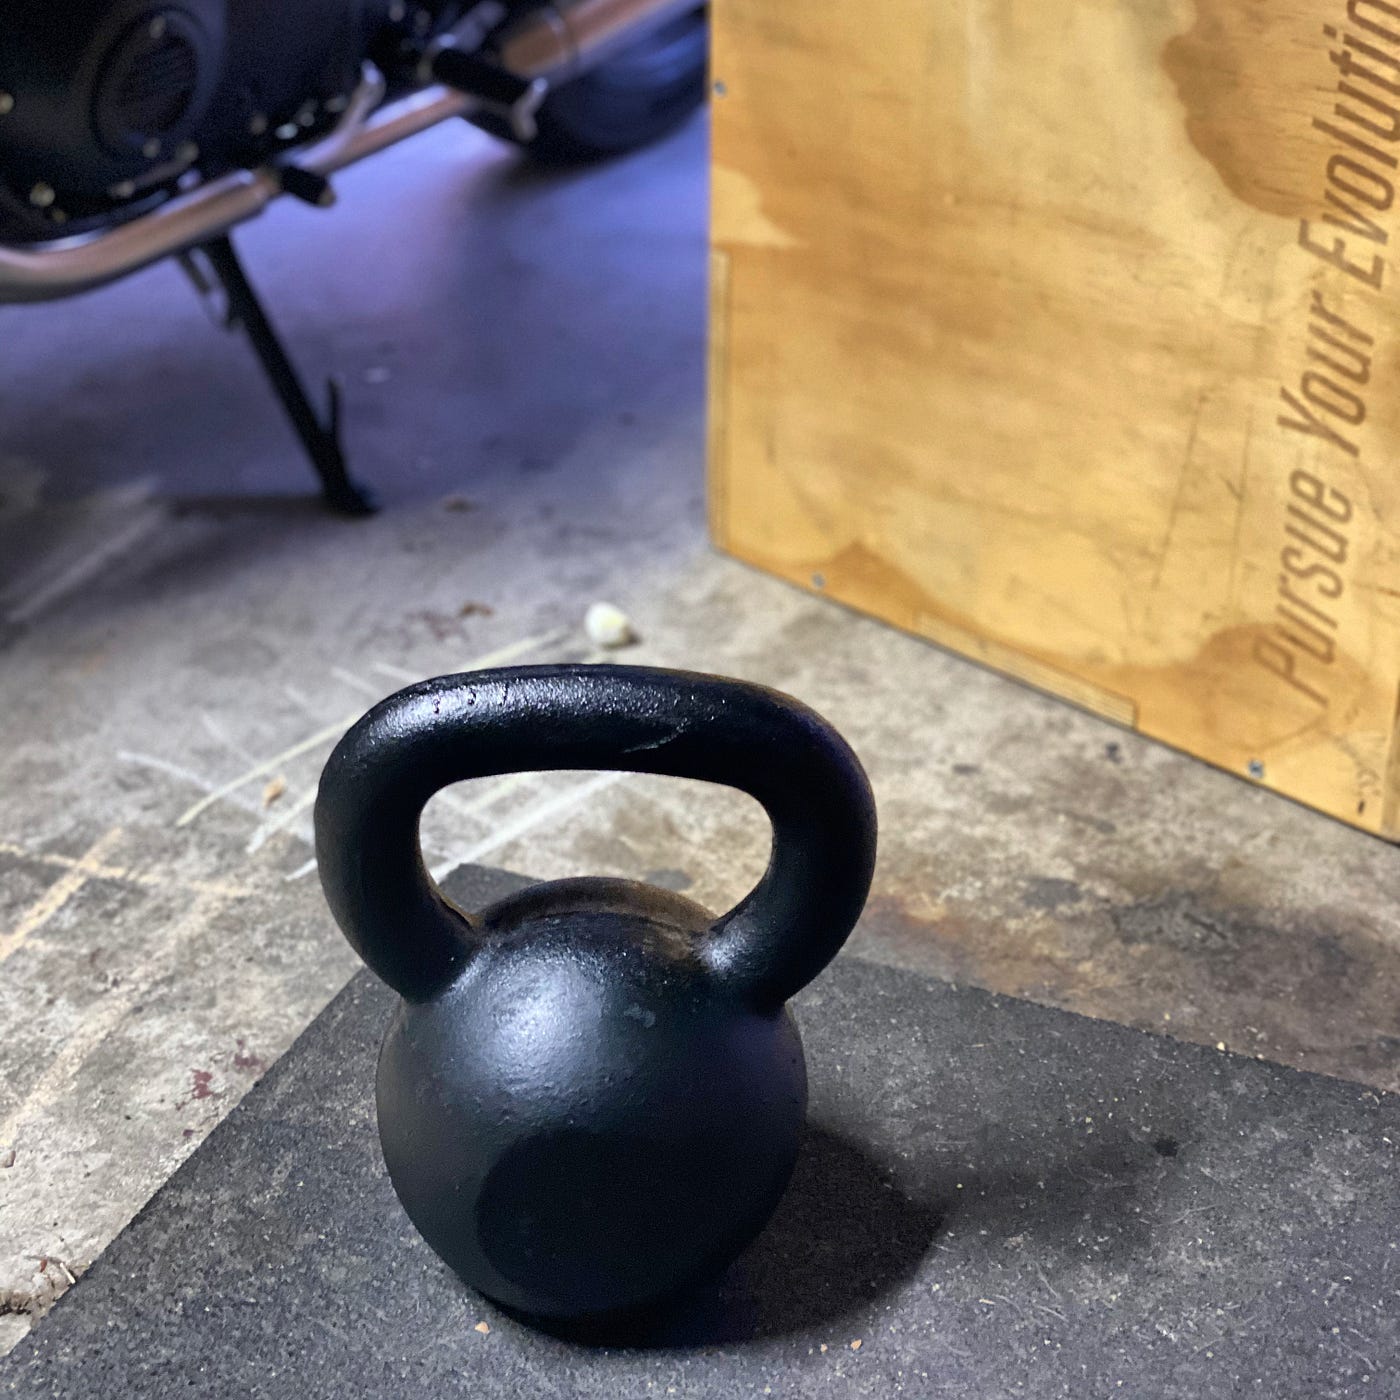 I did the 10,000 Kettle bell swing challenge and I didn't die. | by Patrick  Needs | Medium